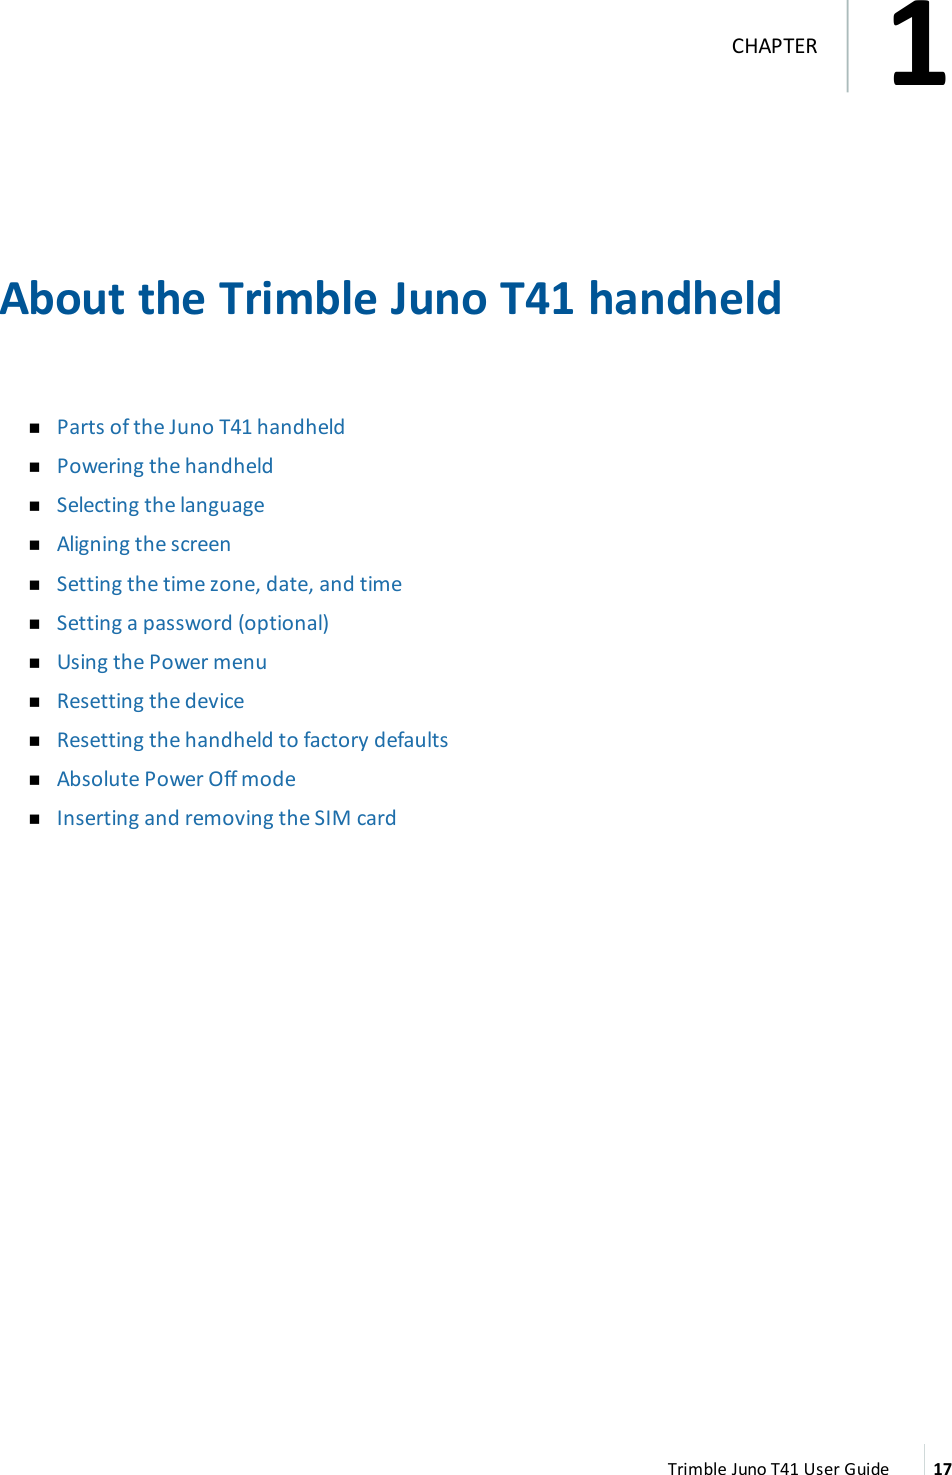 About the Trimble Juno T41 handheldnParts of the Juno T41 handheldnPowering the handheldnSelecting the languagenAligning the screennSetting the time zone, date, and timenSetting a password (optional)nUsing the Power menunResetting the devicenResetting the handheld to factory defaultsnAbsolute Power Off modenInserting and removing the SIM cardTrimble Juno T41 User Guide 171CHAPTER